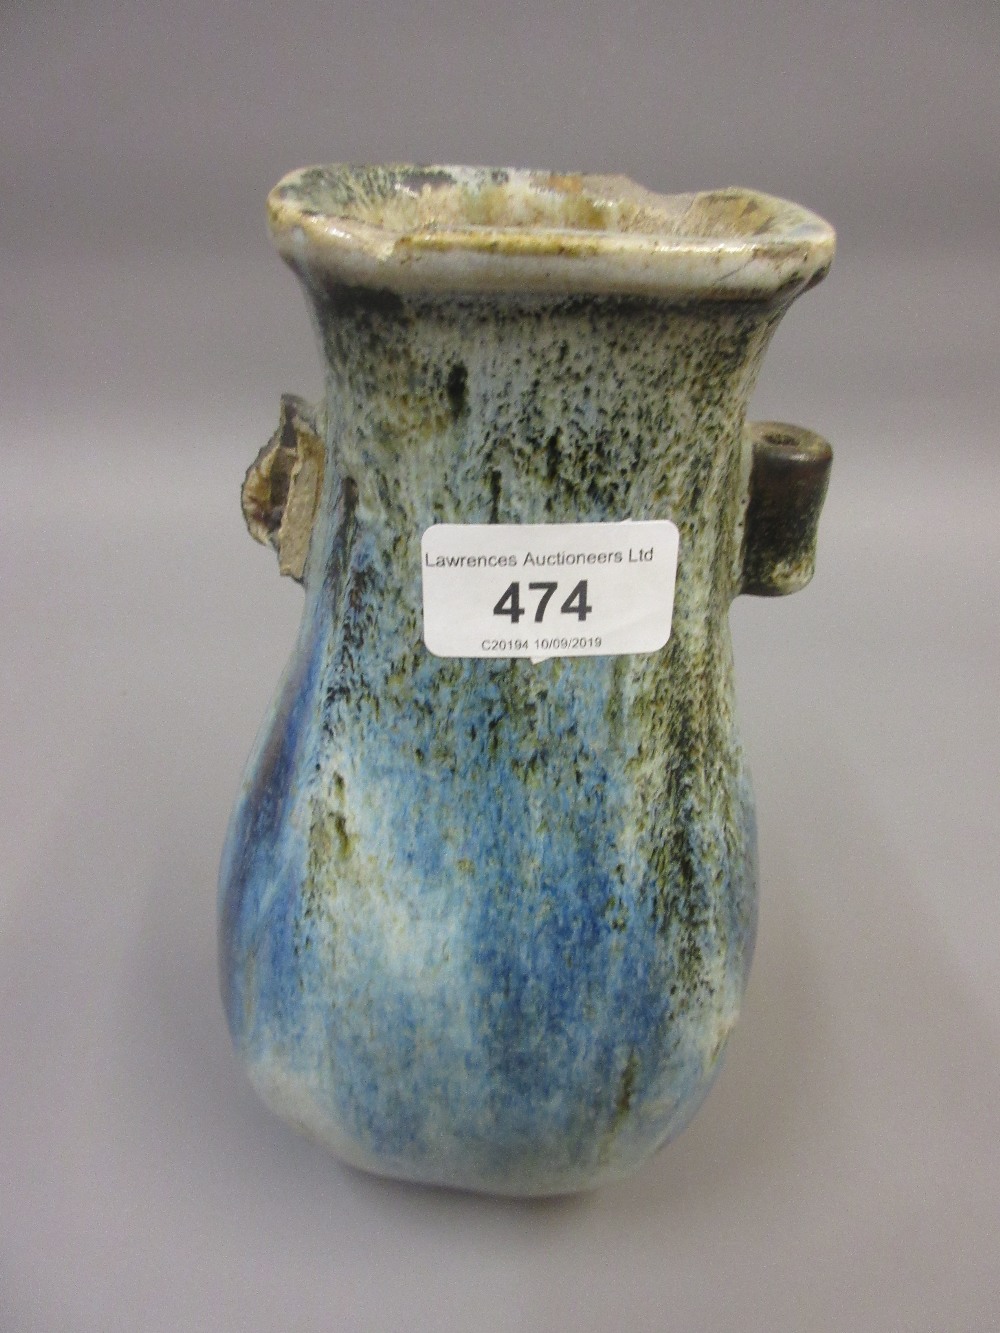 Antique Chinese stoneware rectangular baluster form vase decorated with a mottled blue glaze (with